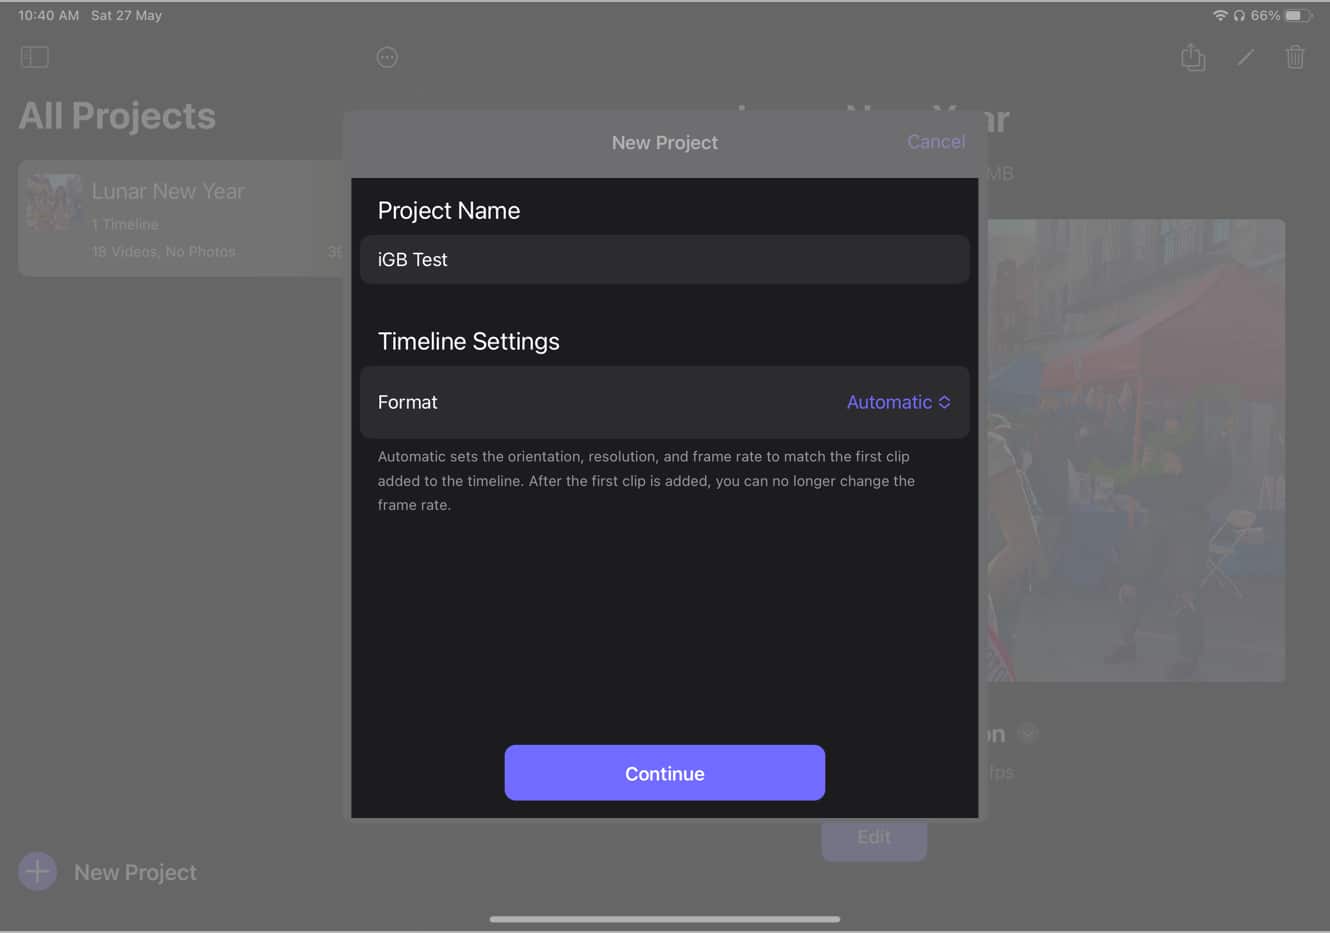 Enter your Project Name, set Timeline Settings, and hit Continue